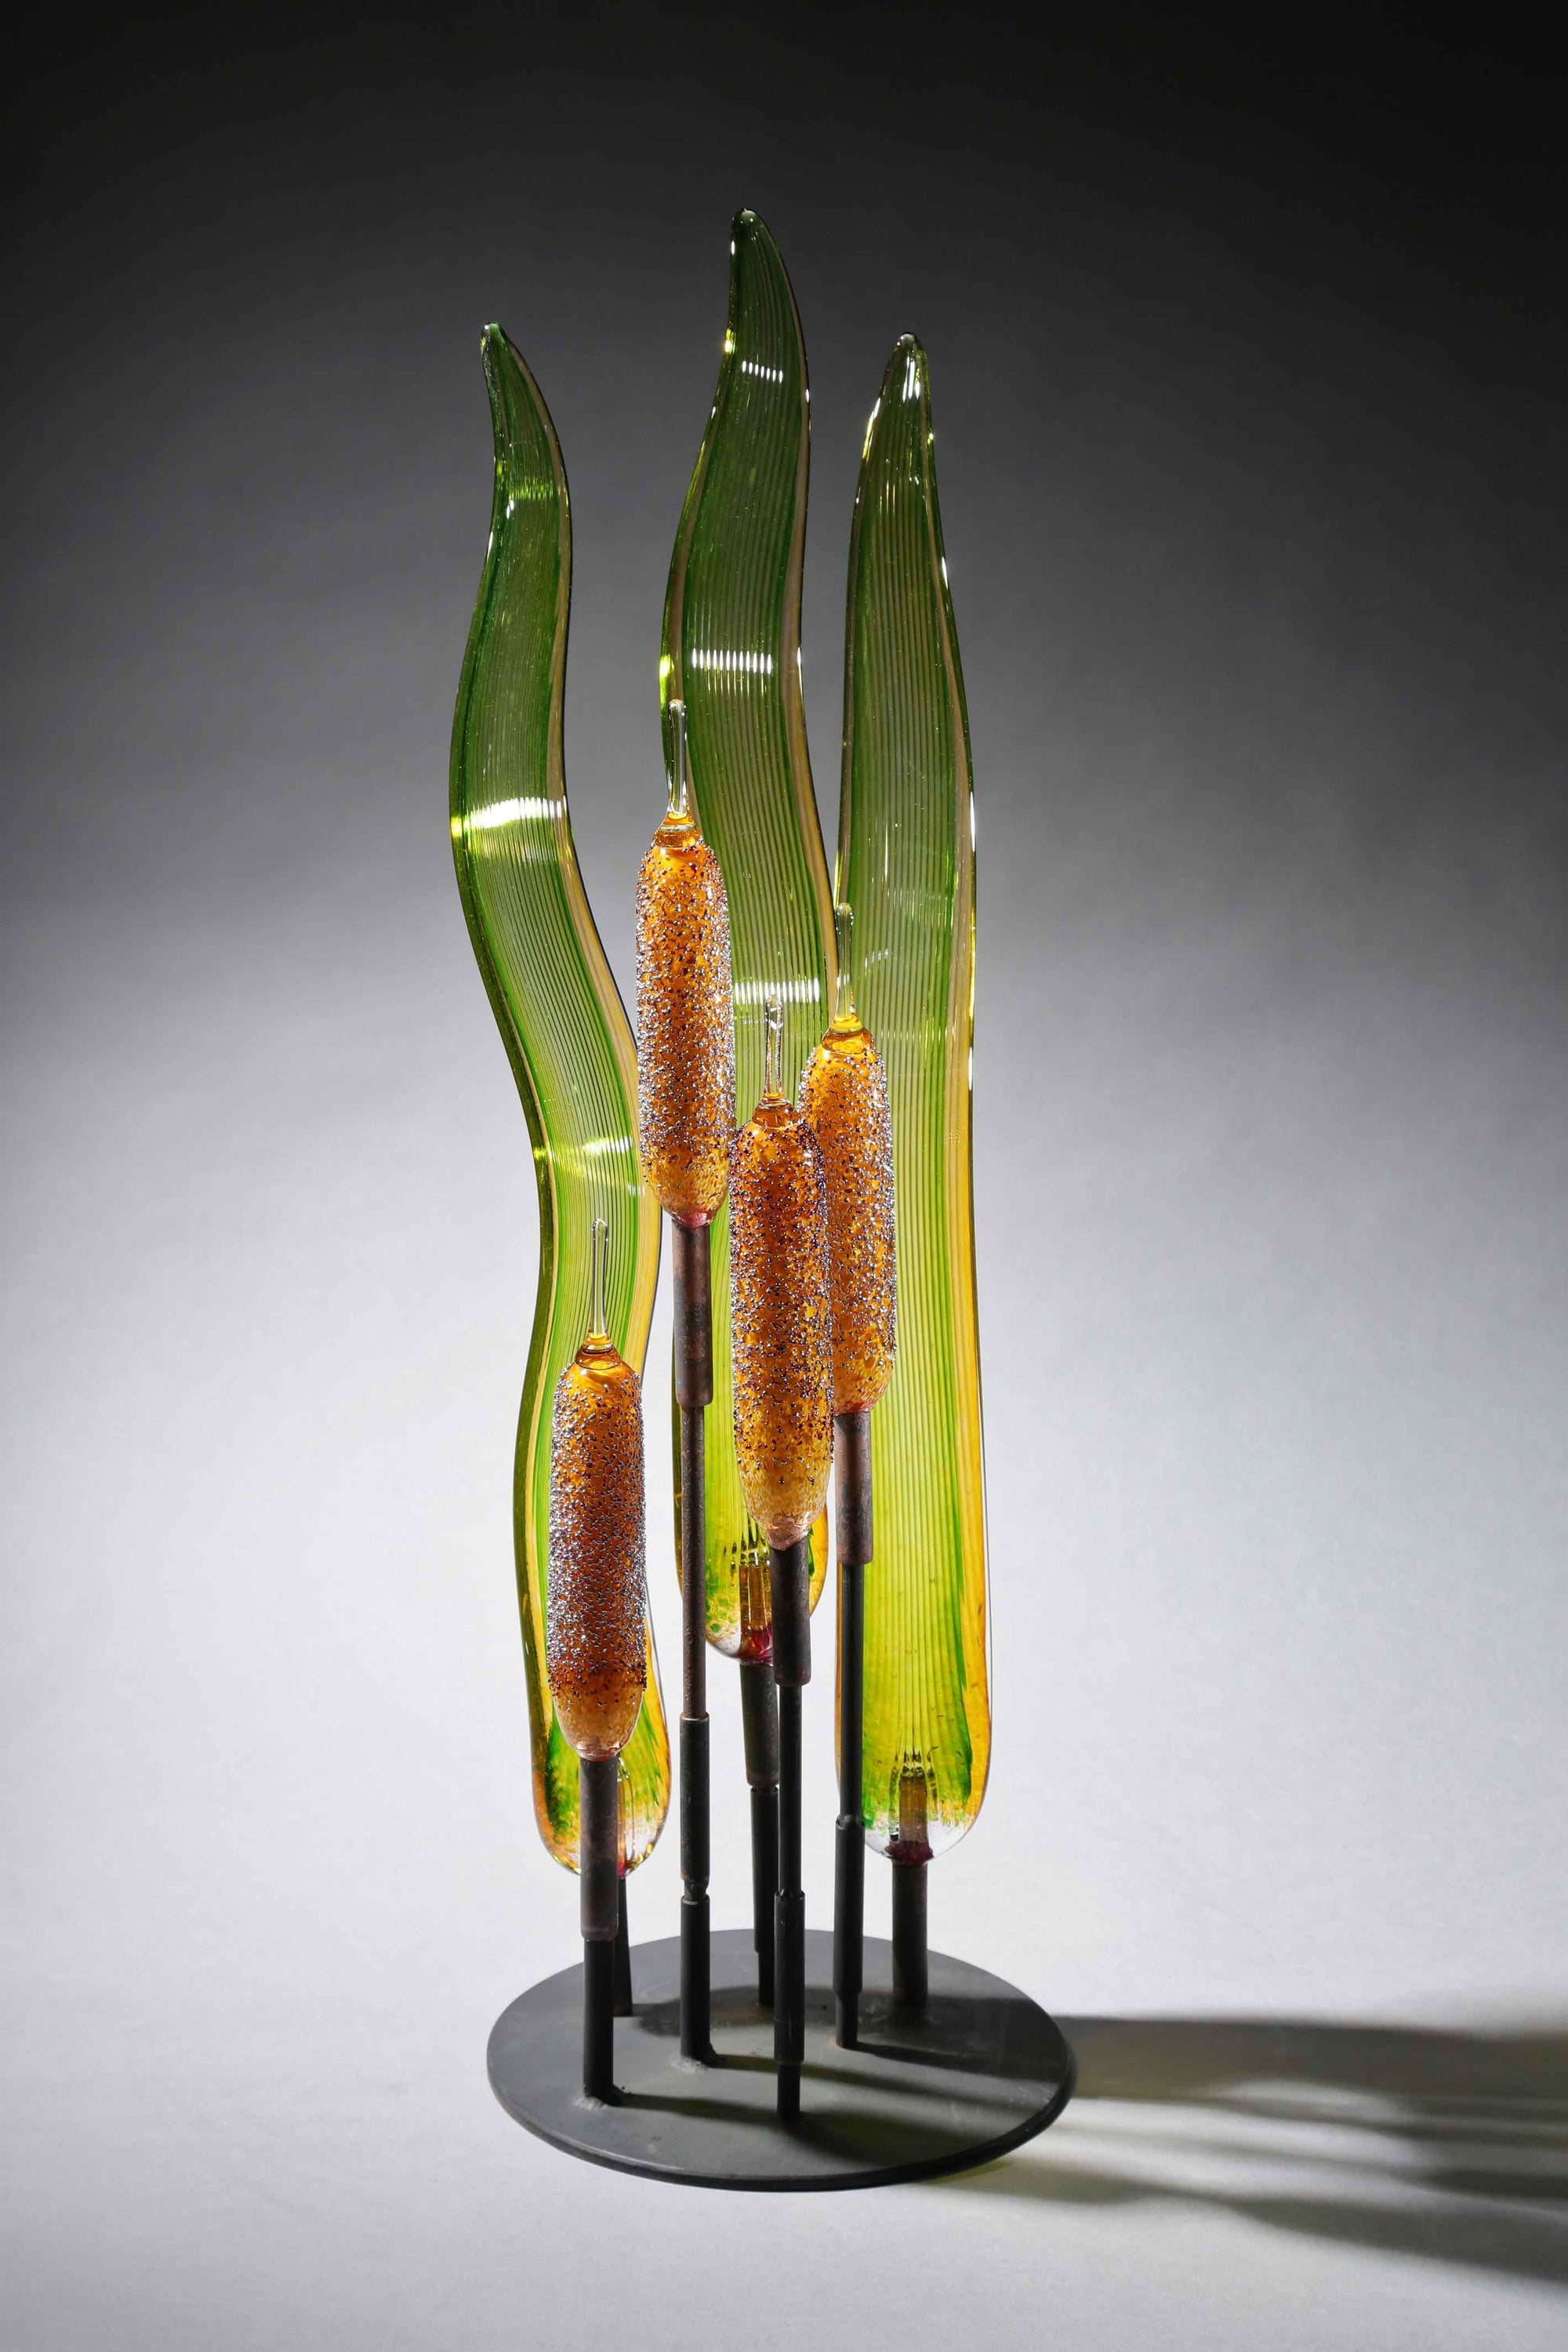 Cattail Arrangement with Cattail Leaves 7 pt